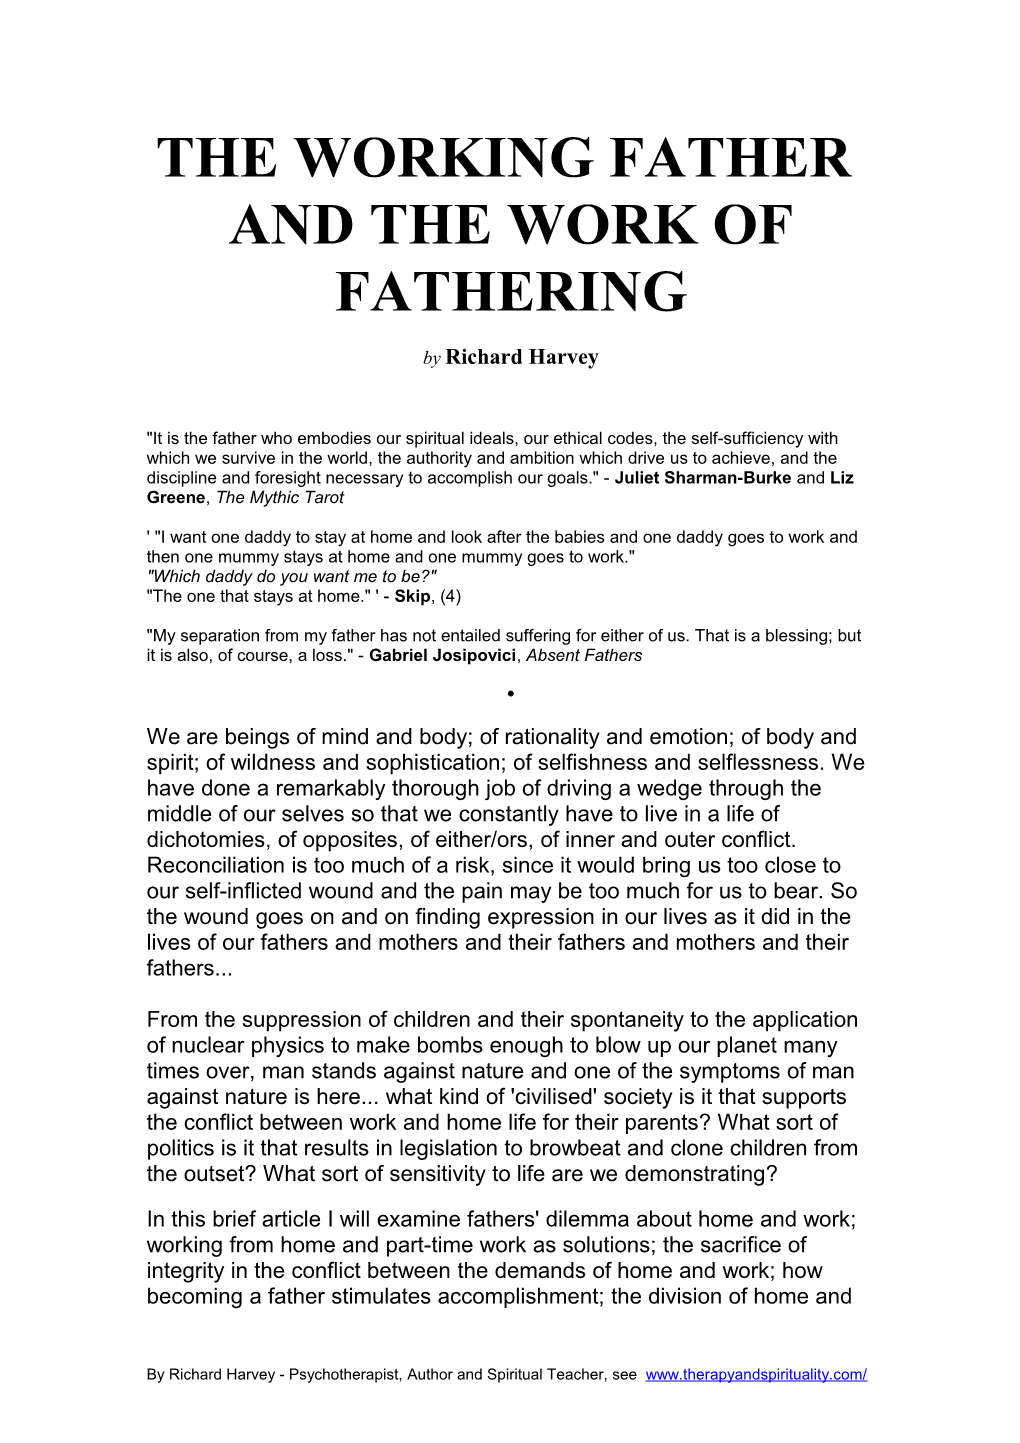 The Working Father by Richard Harvey: Inspired Fatherhood Article